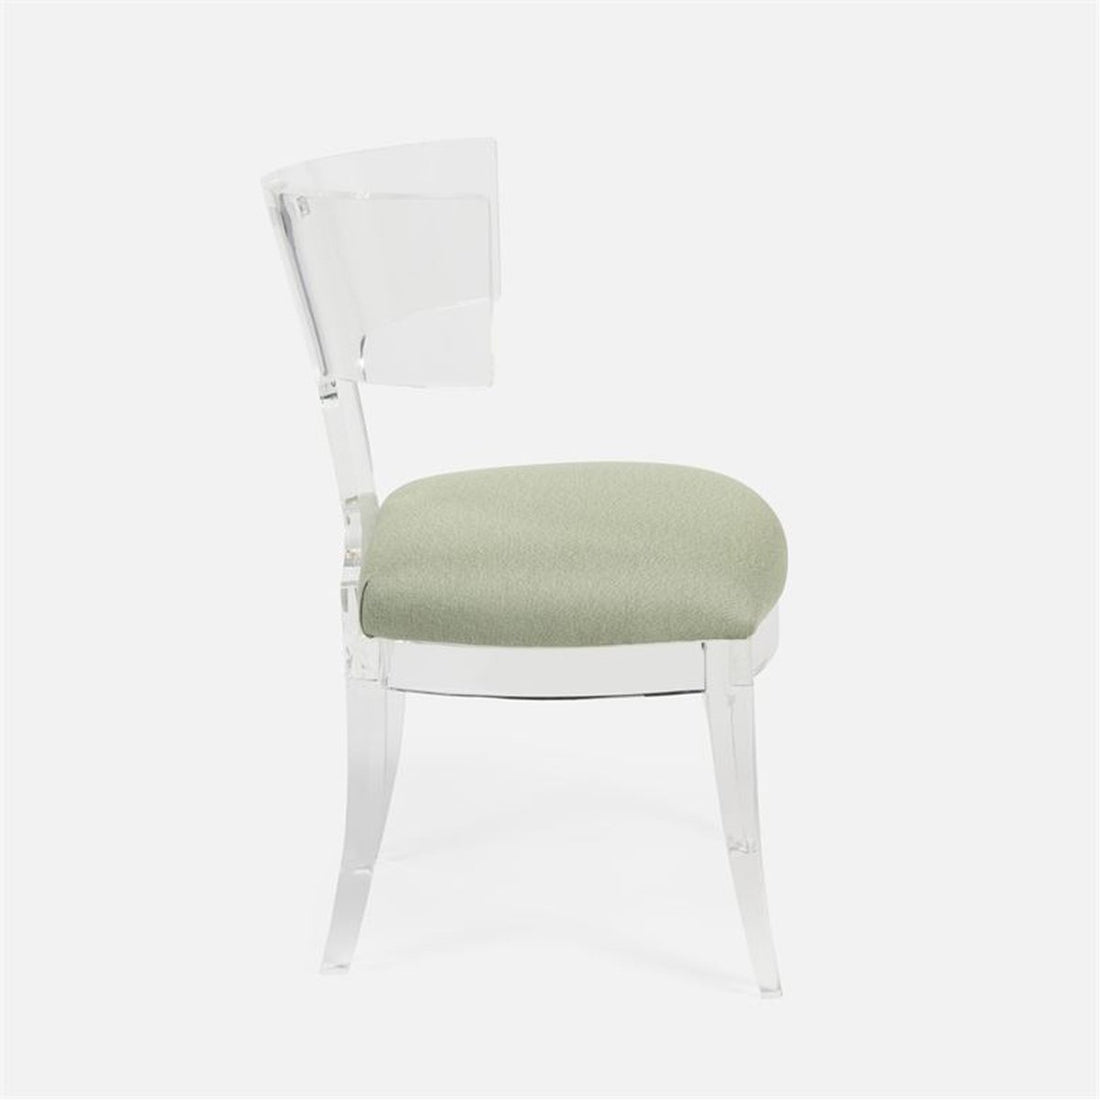 Made Goods Gibson Acrylic Wingback Dining Chair in Arno Fabric